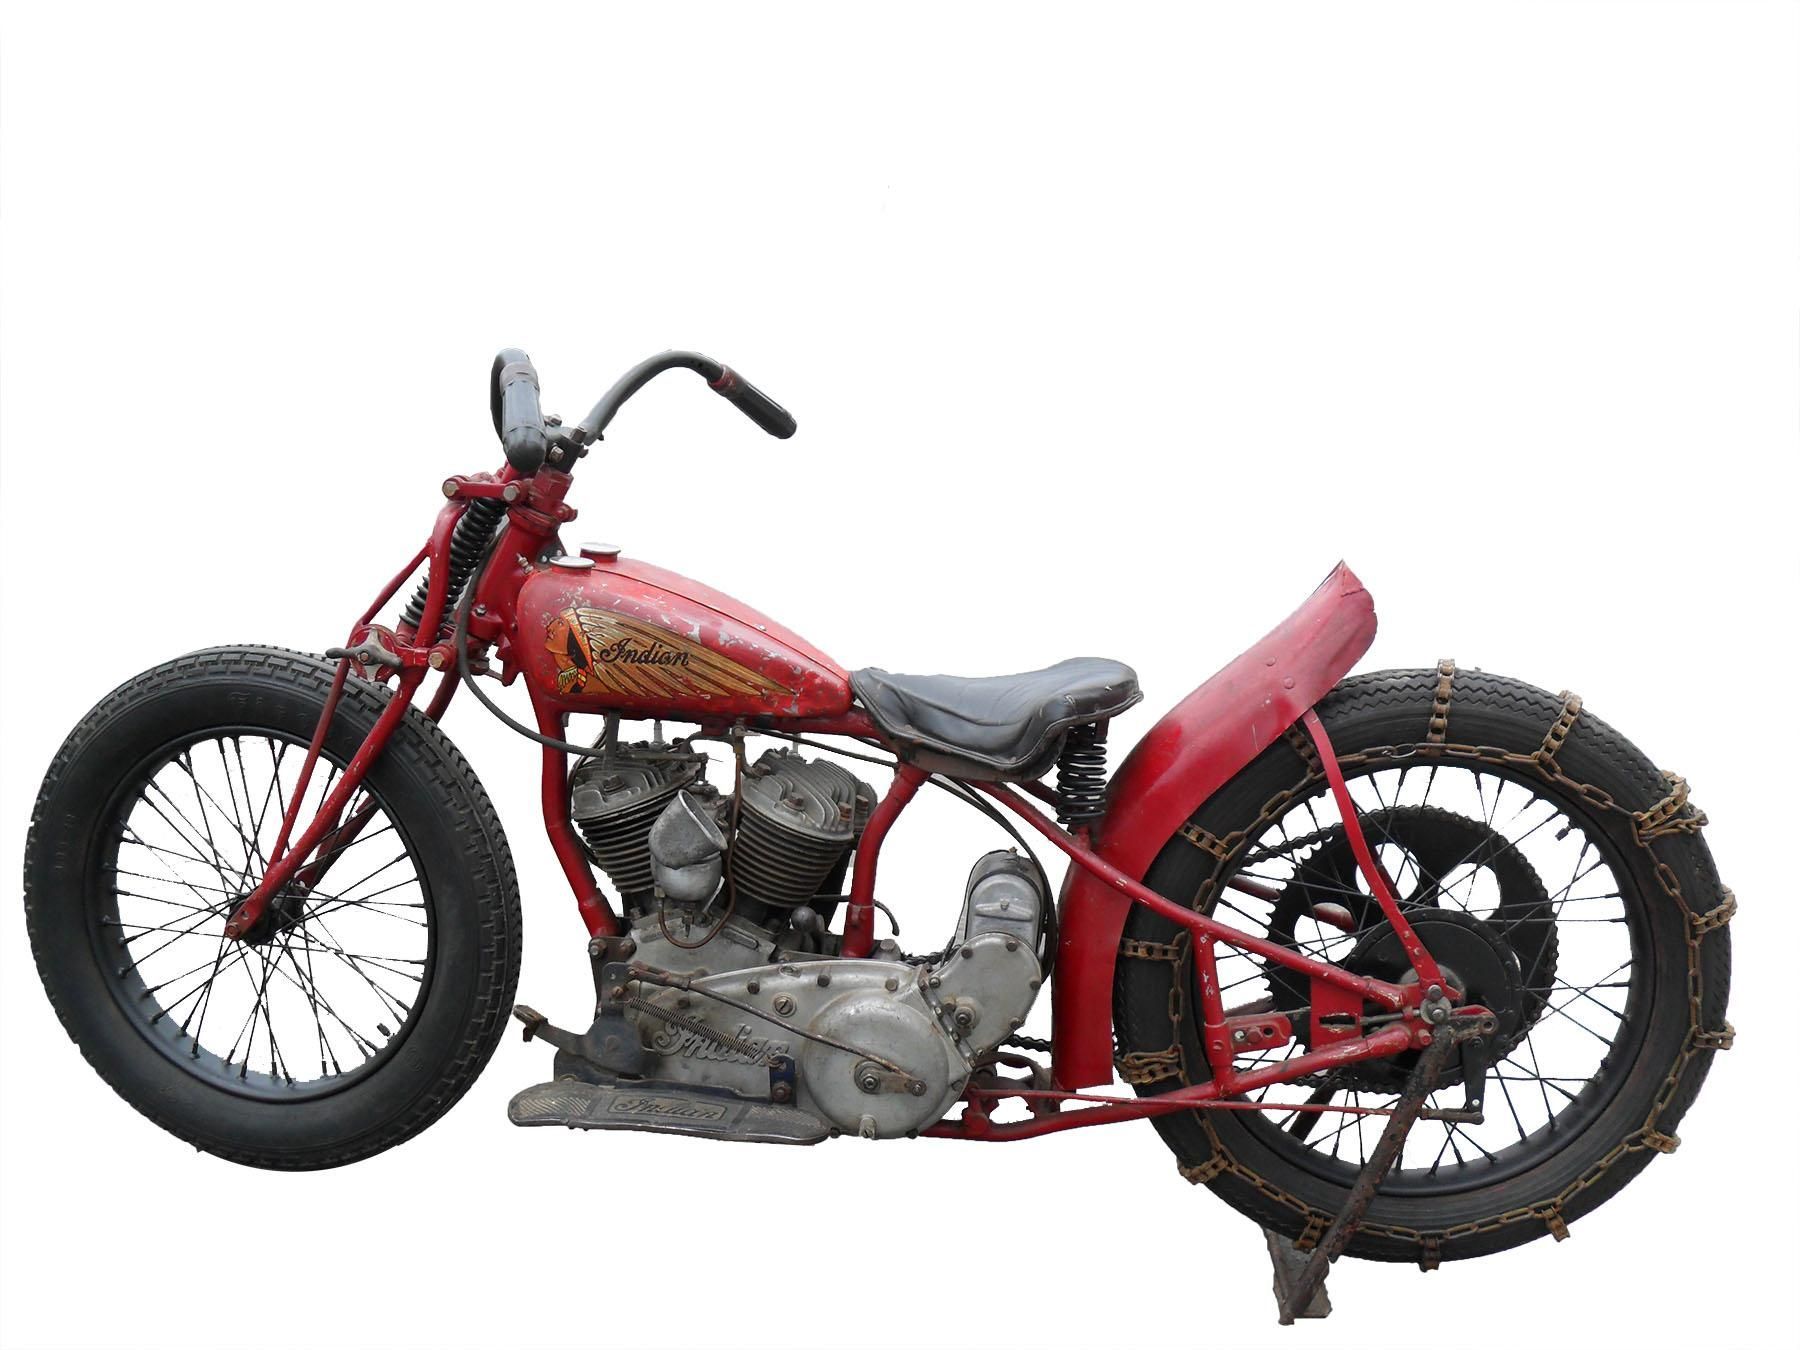 1939 Indian Hill Climber - MidAmerica Auctions